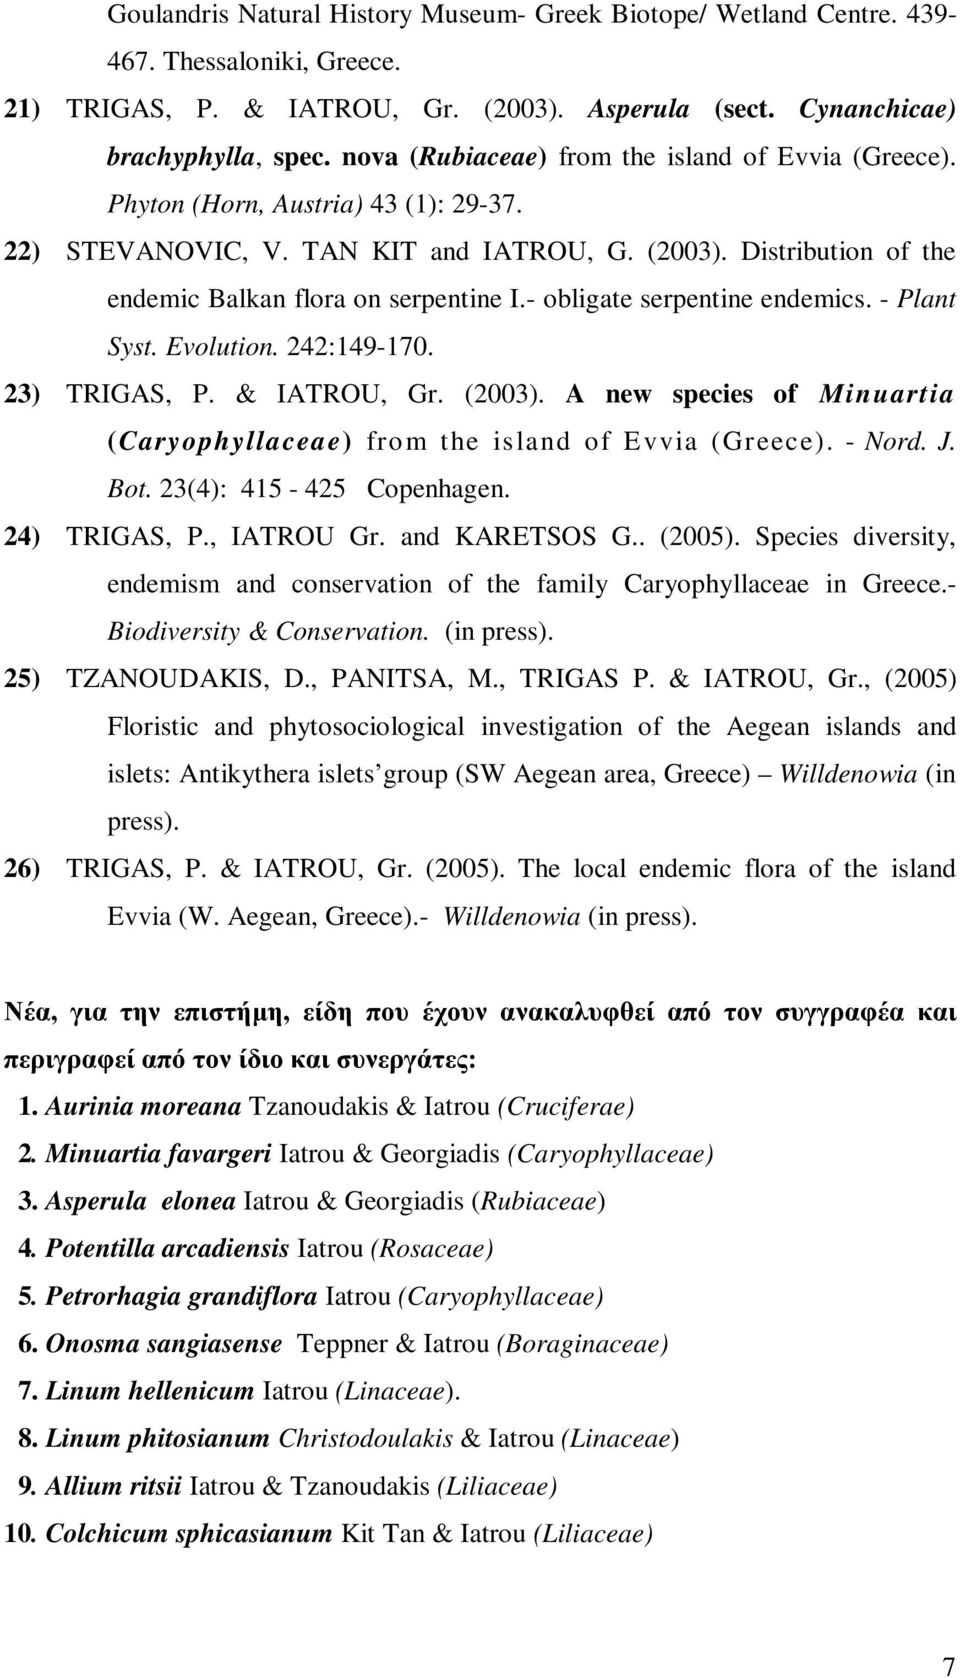 - obligate serpentine endemics. - Plant Syst. Evolution. 242:149-170. 23) TRIGAS, P. & IATROU, Gr. (2003). A new species of Minuartia (Caryophyllaceae) from the island of Evvia (Greece). - Nord. J.